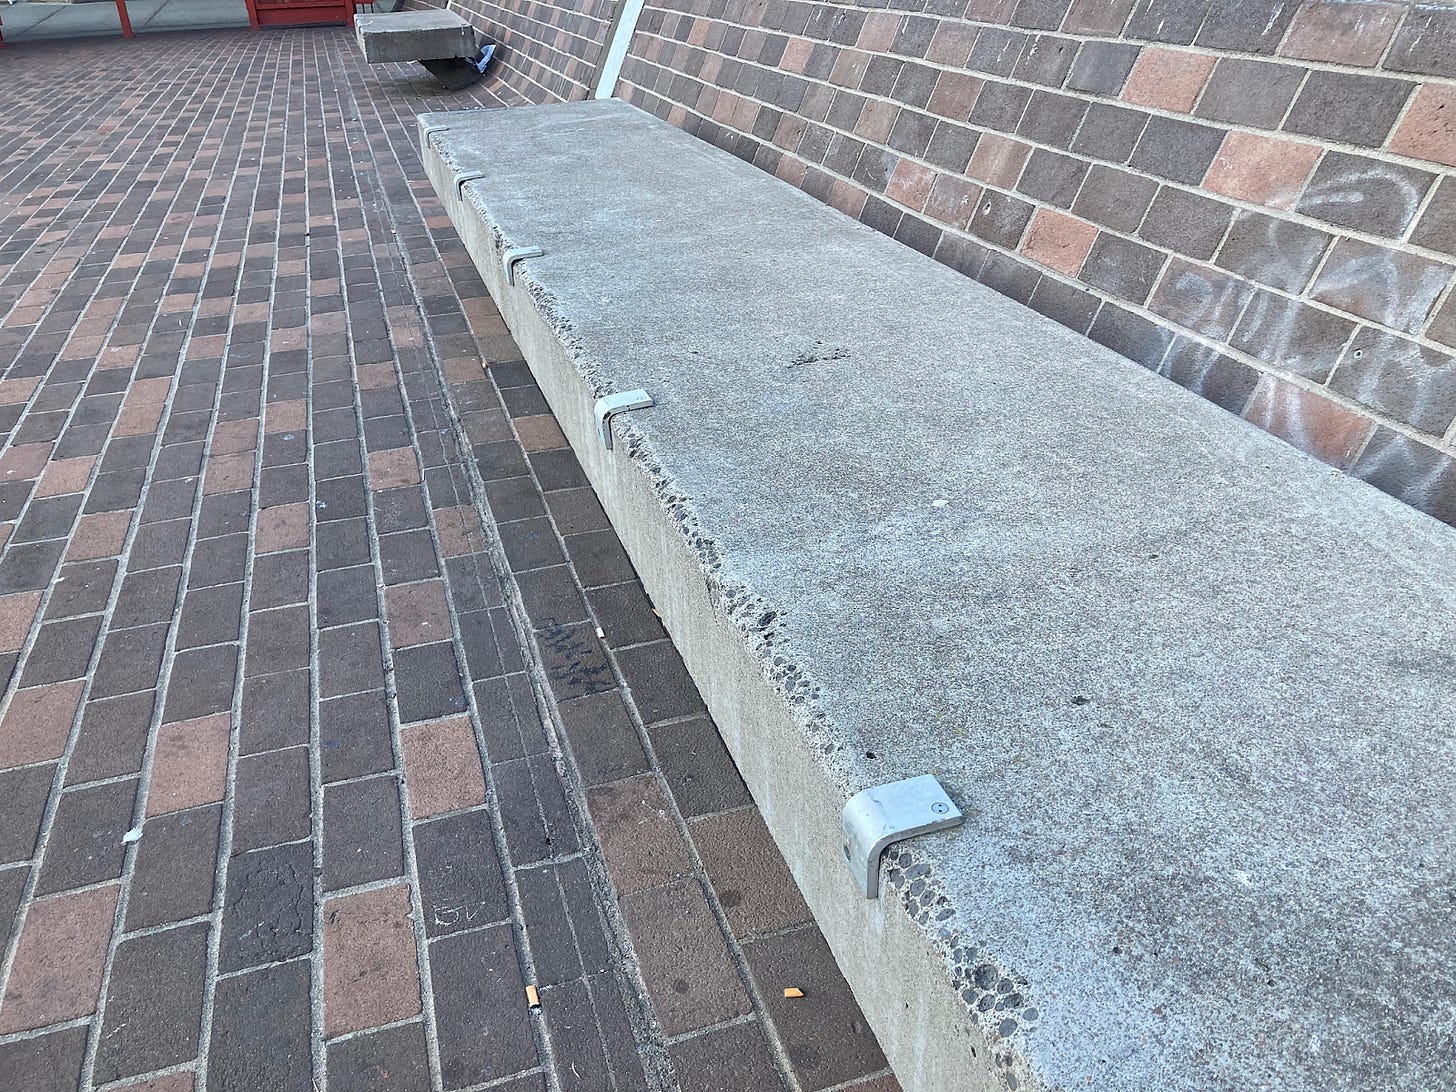 A bench that has evenly spaced corner brackets preventing skateboarders from grinding their boards along it.